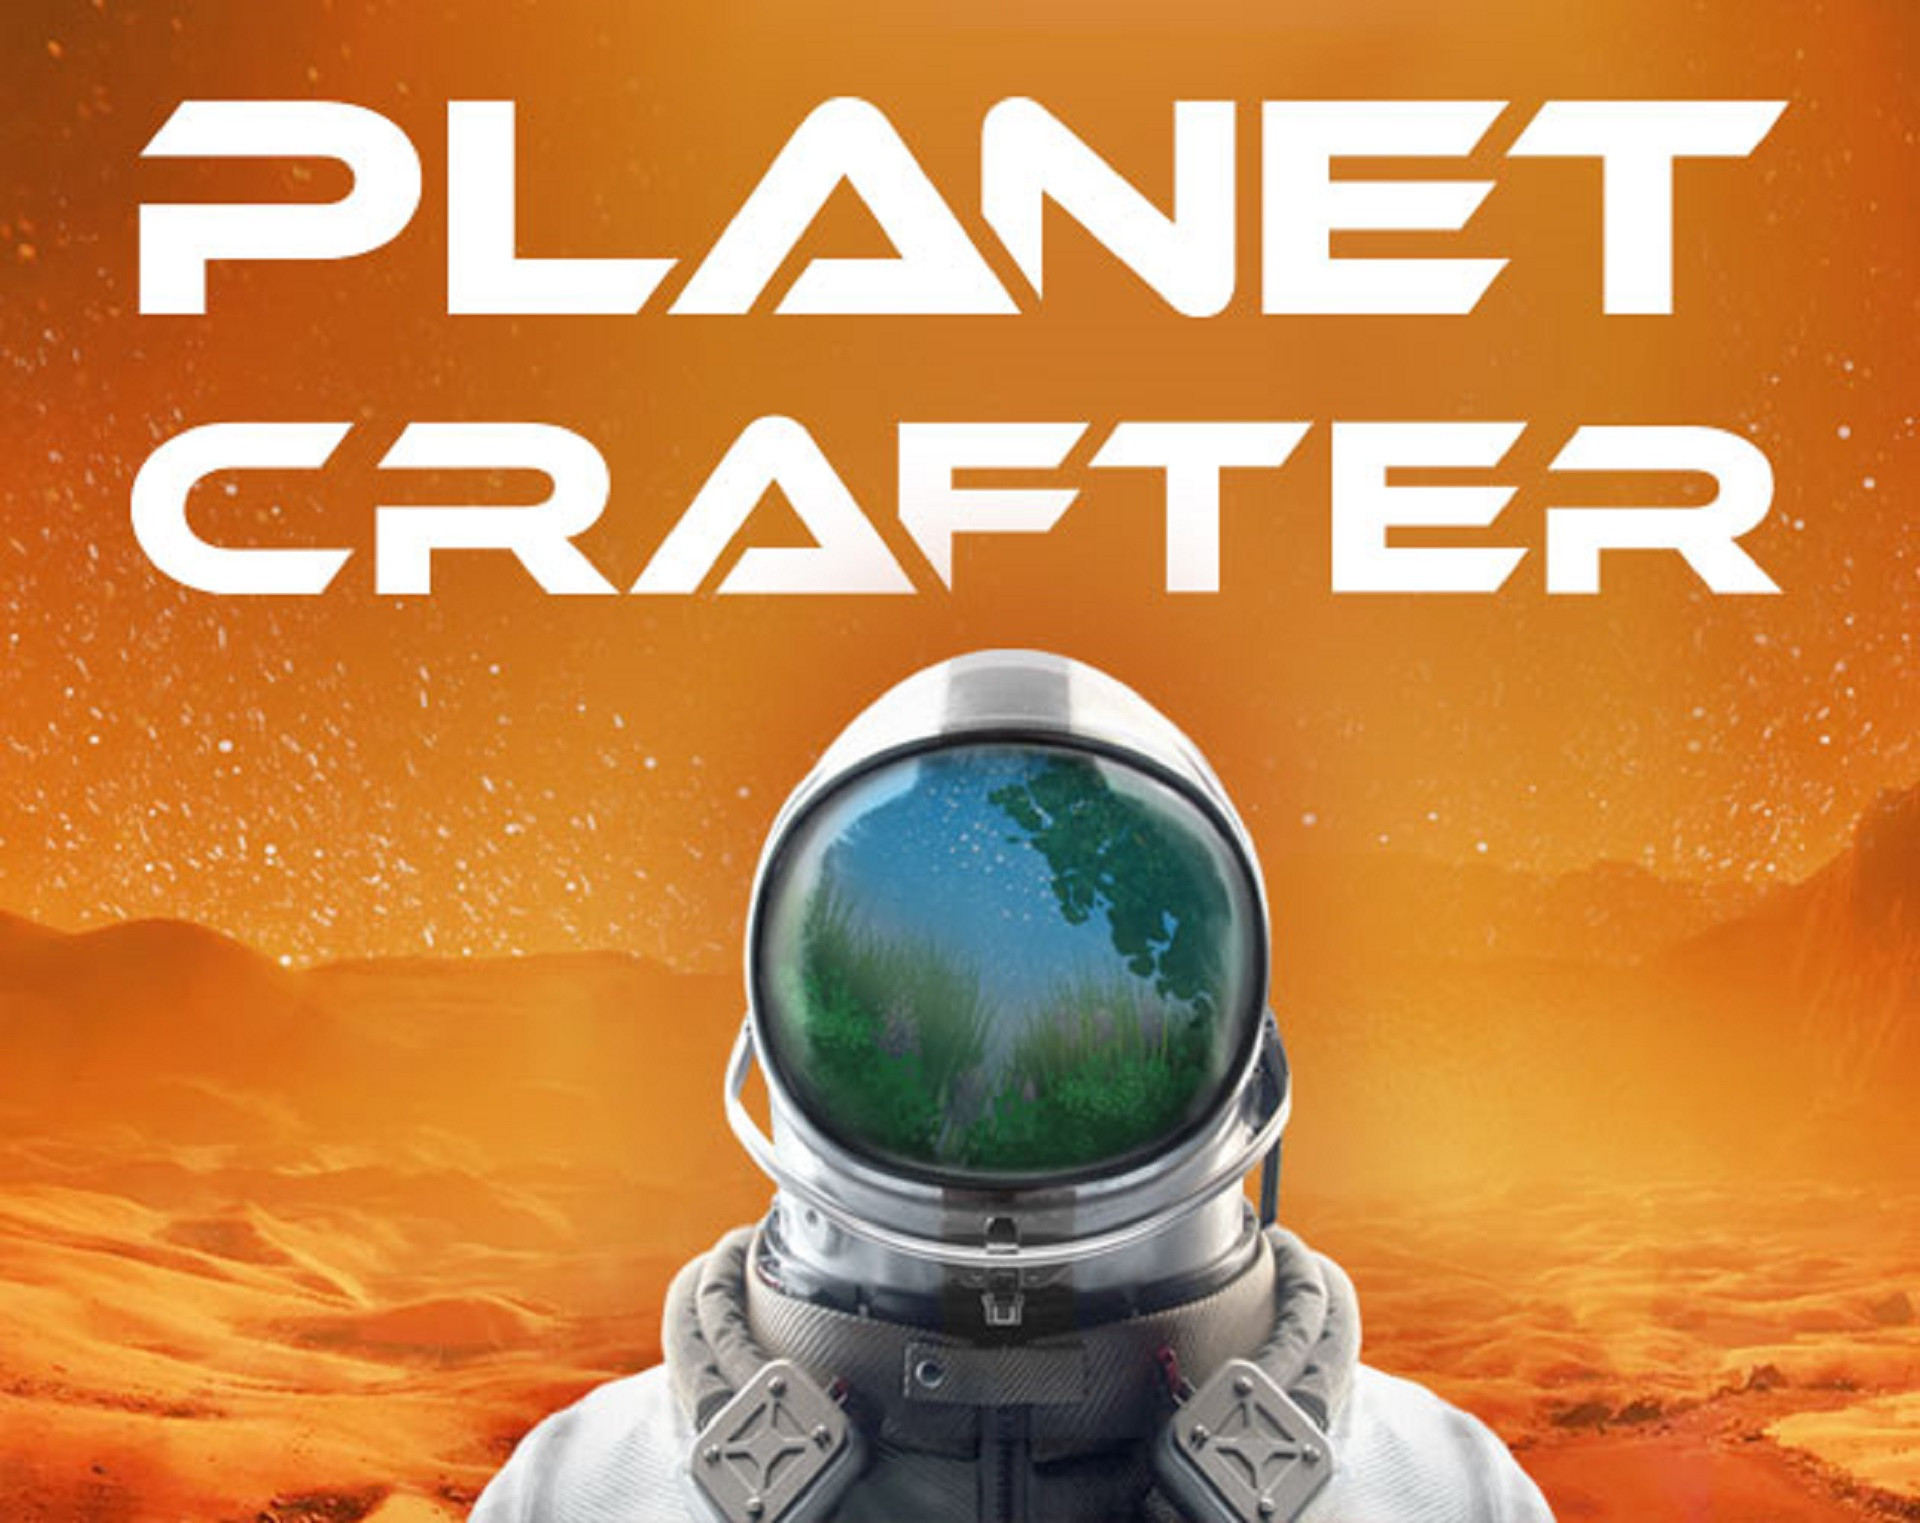 Игра планет крафтер. Игра the Planet Crafter. Planet Crafter последняя версия. The Planet Crafter планеты. Planet Crafter карта.